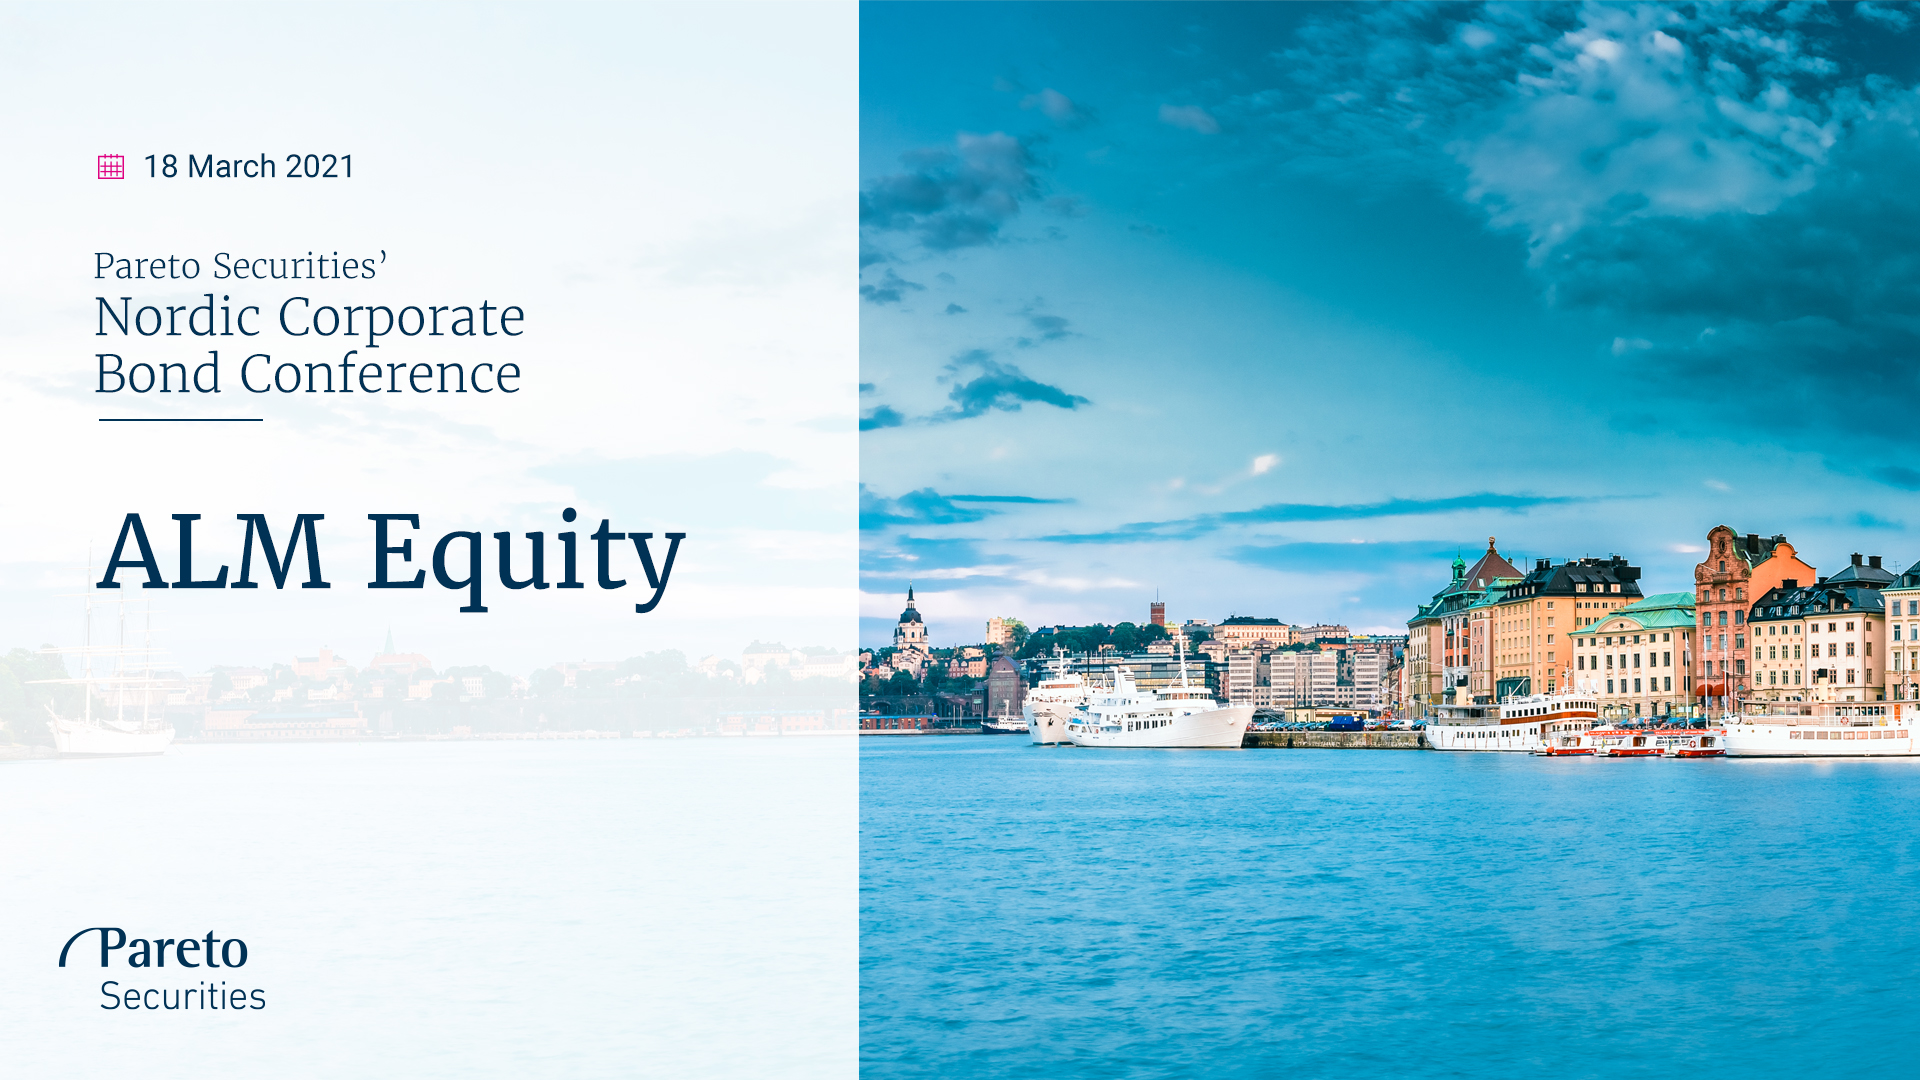 ALM Equity / Pareto Securities' Nordic Corporate Bond Conference